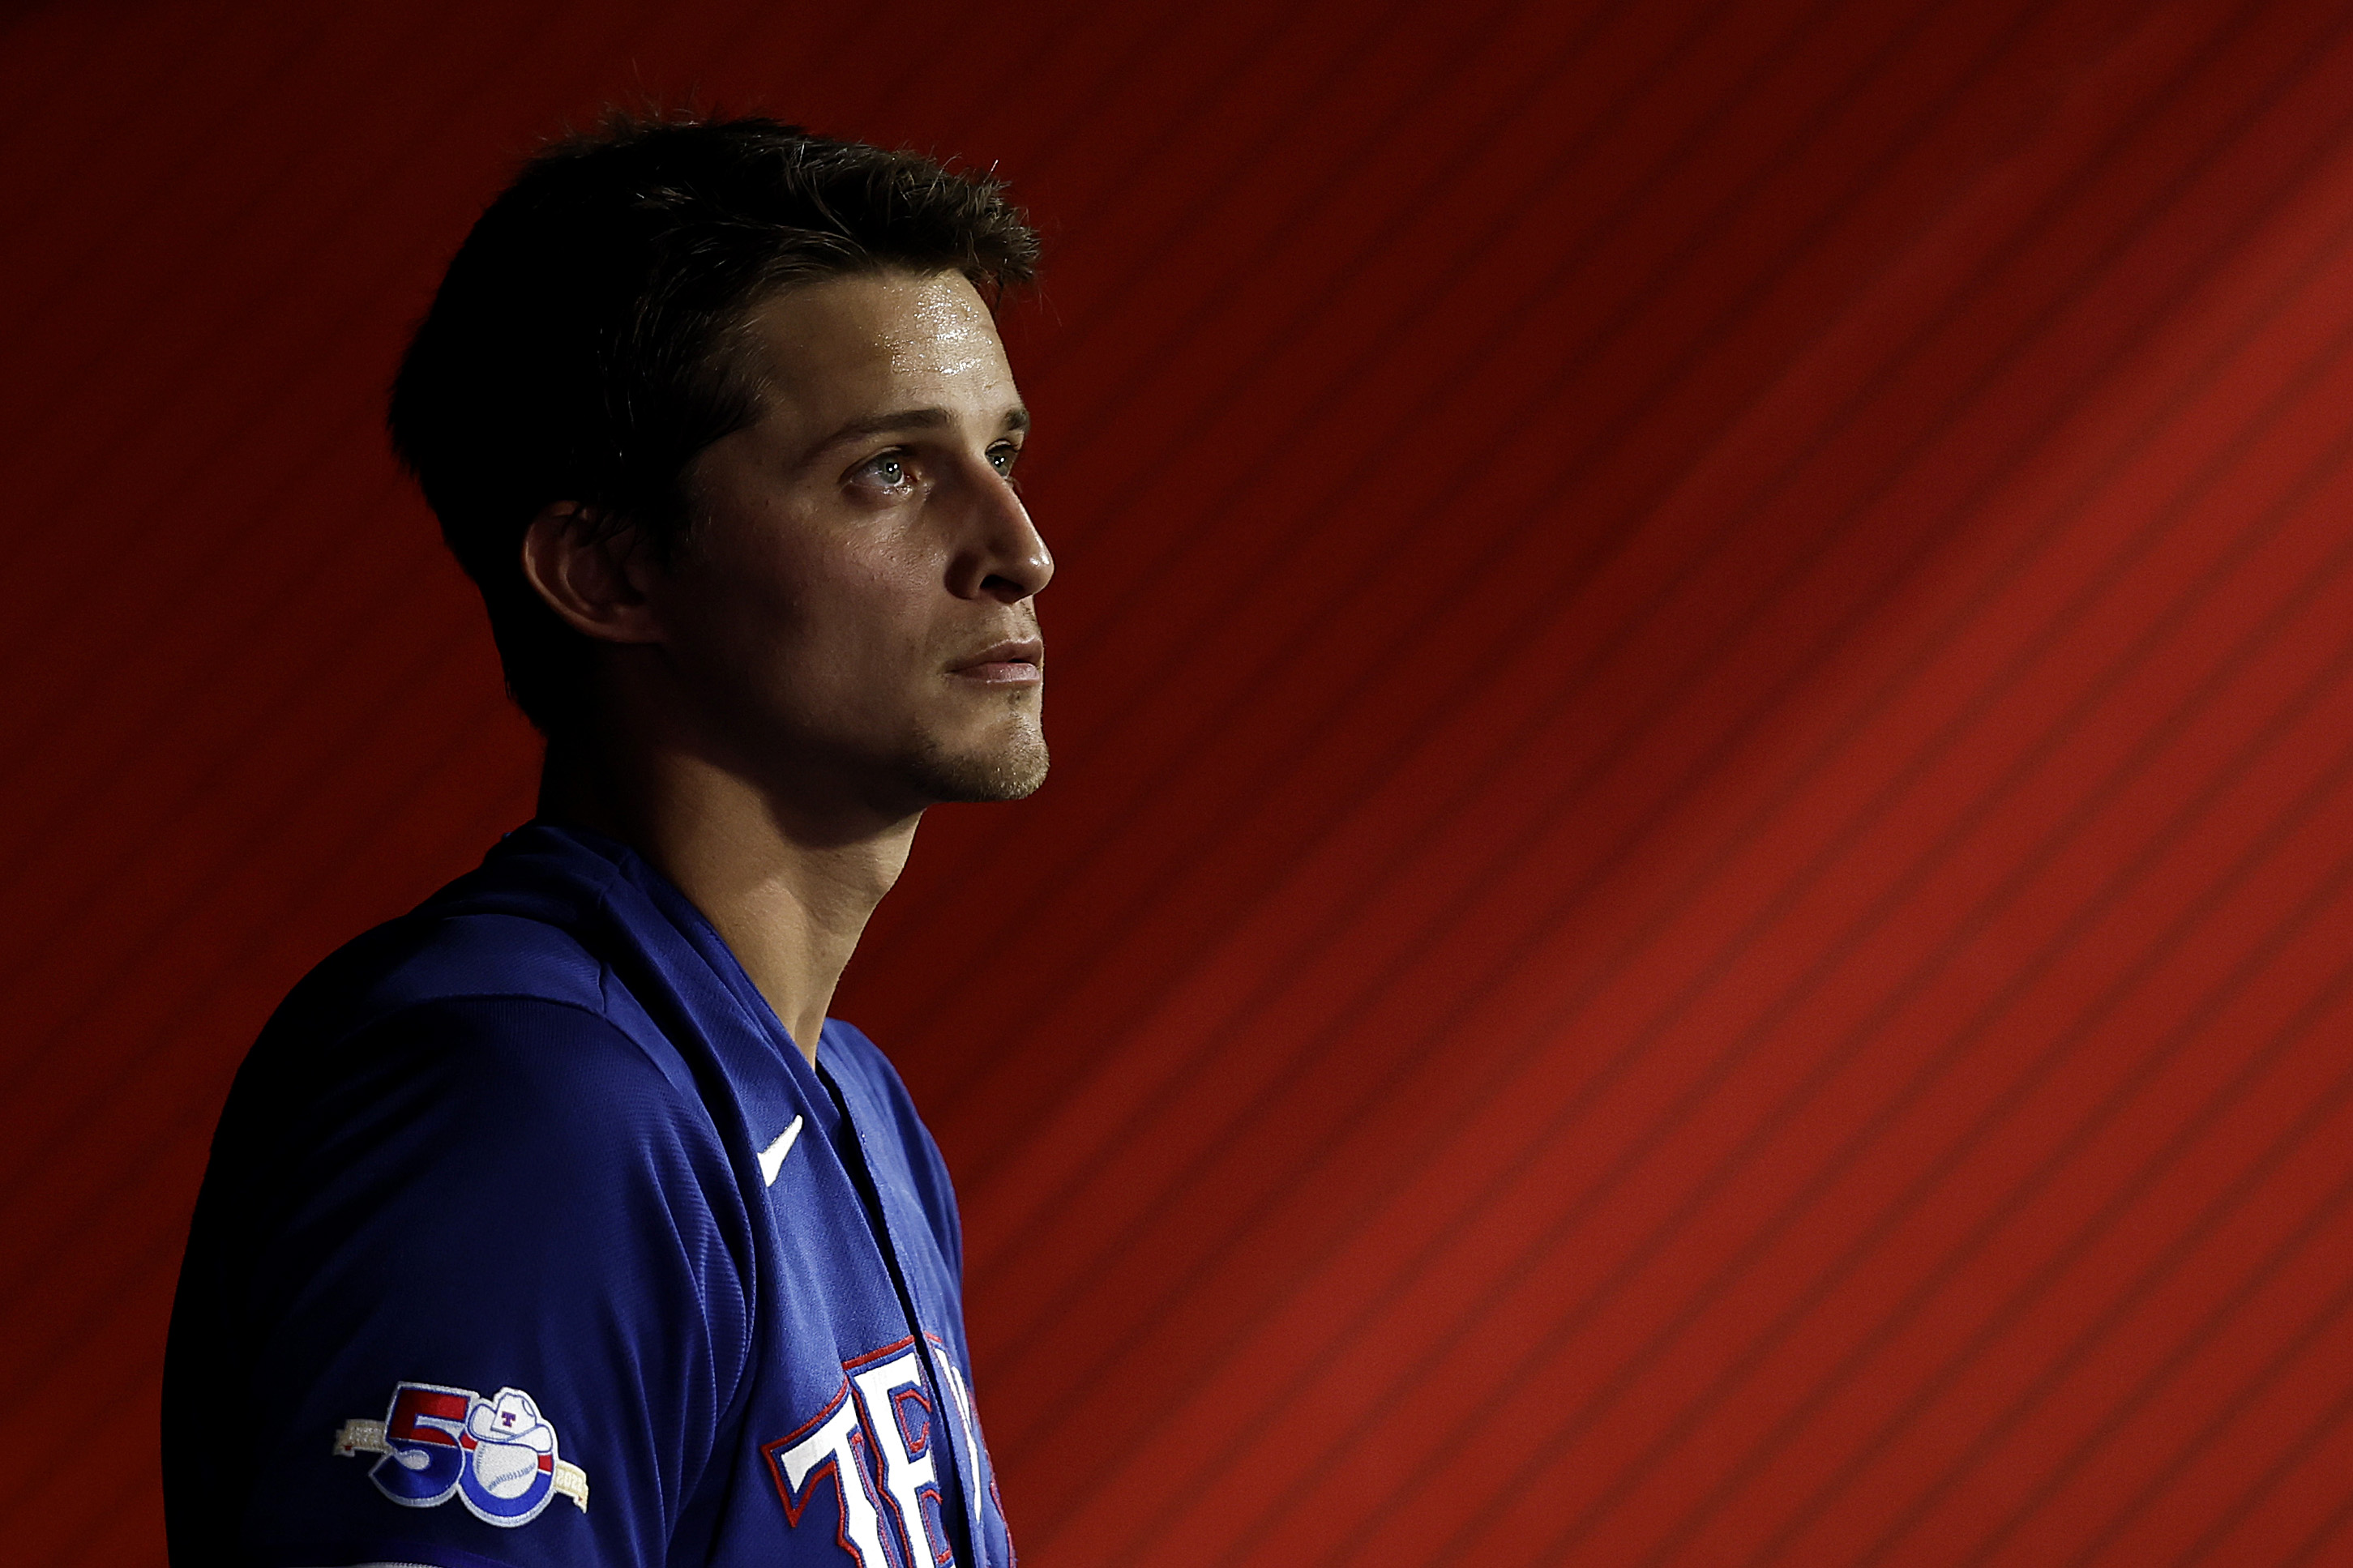 Texas Rangers' Corey Seager exits early due to bruised leg - ESPN